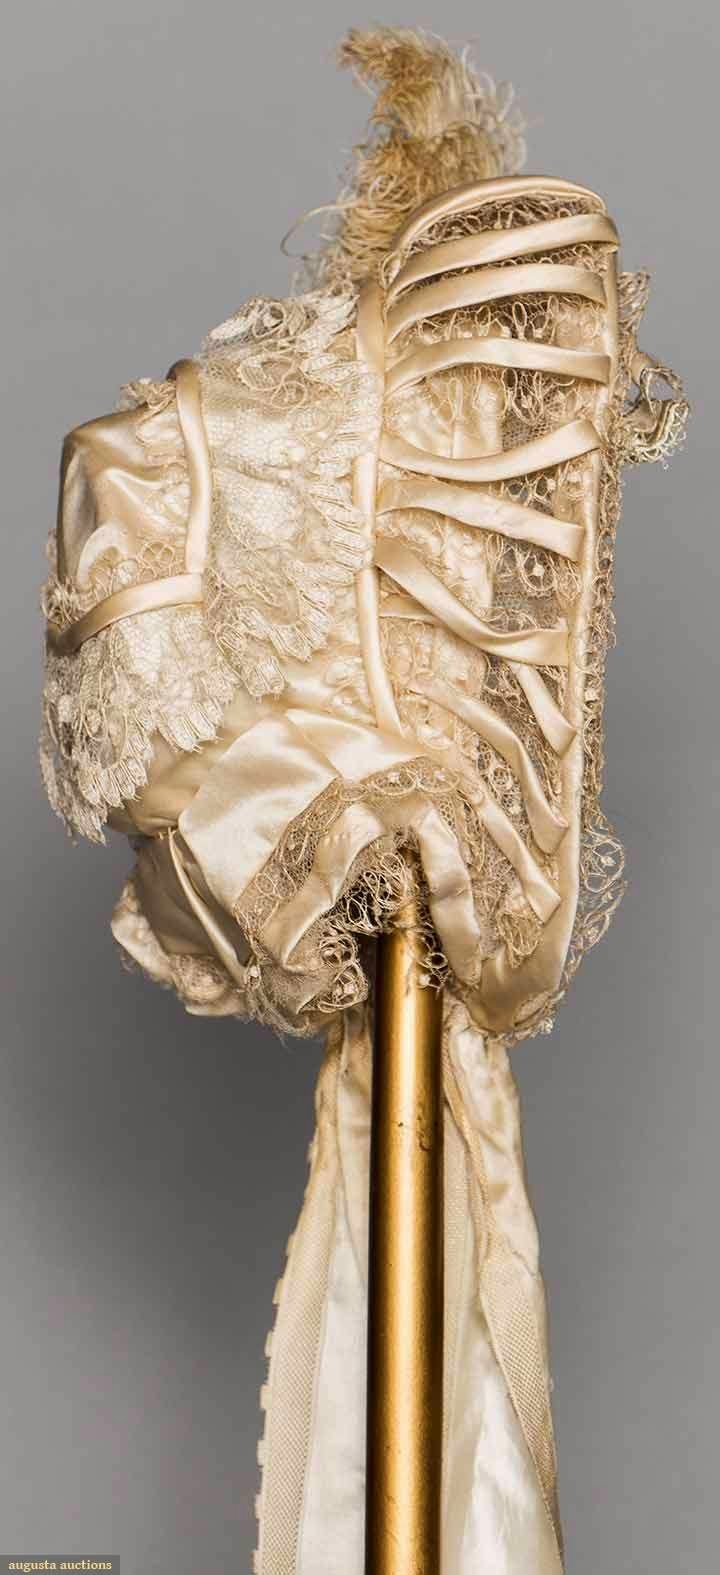 In the Swan's Shadow: OFF WHITE SILK & LACE BONNET, 1850s